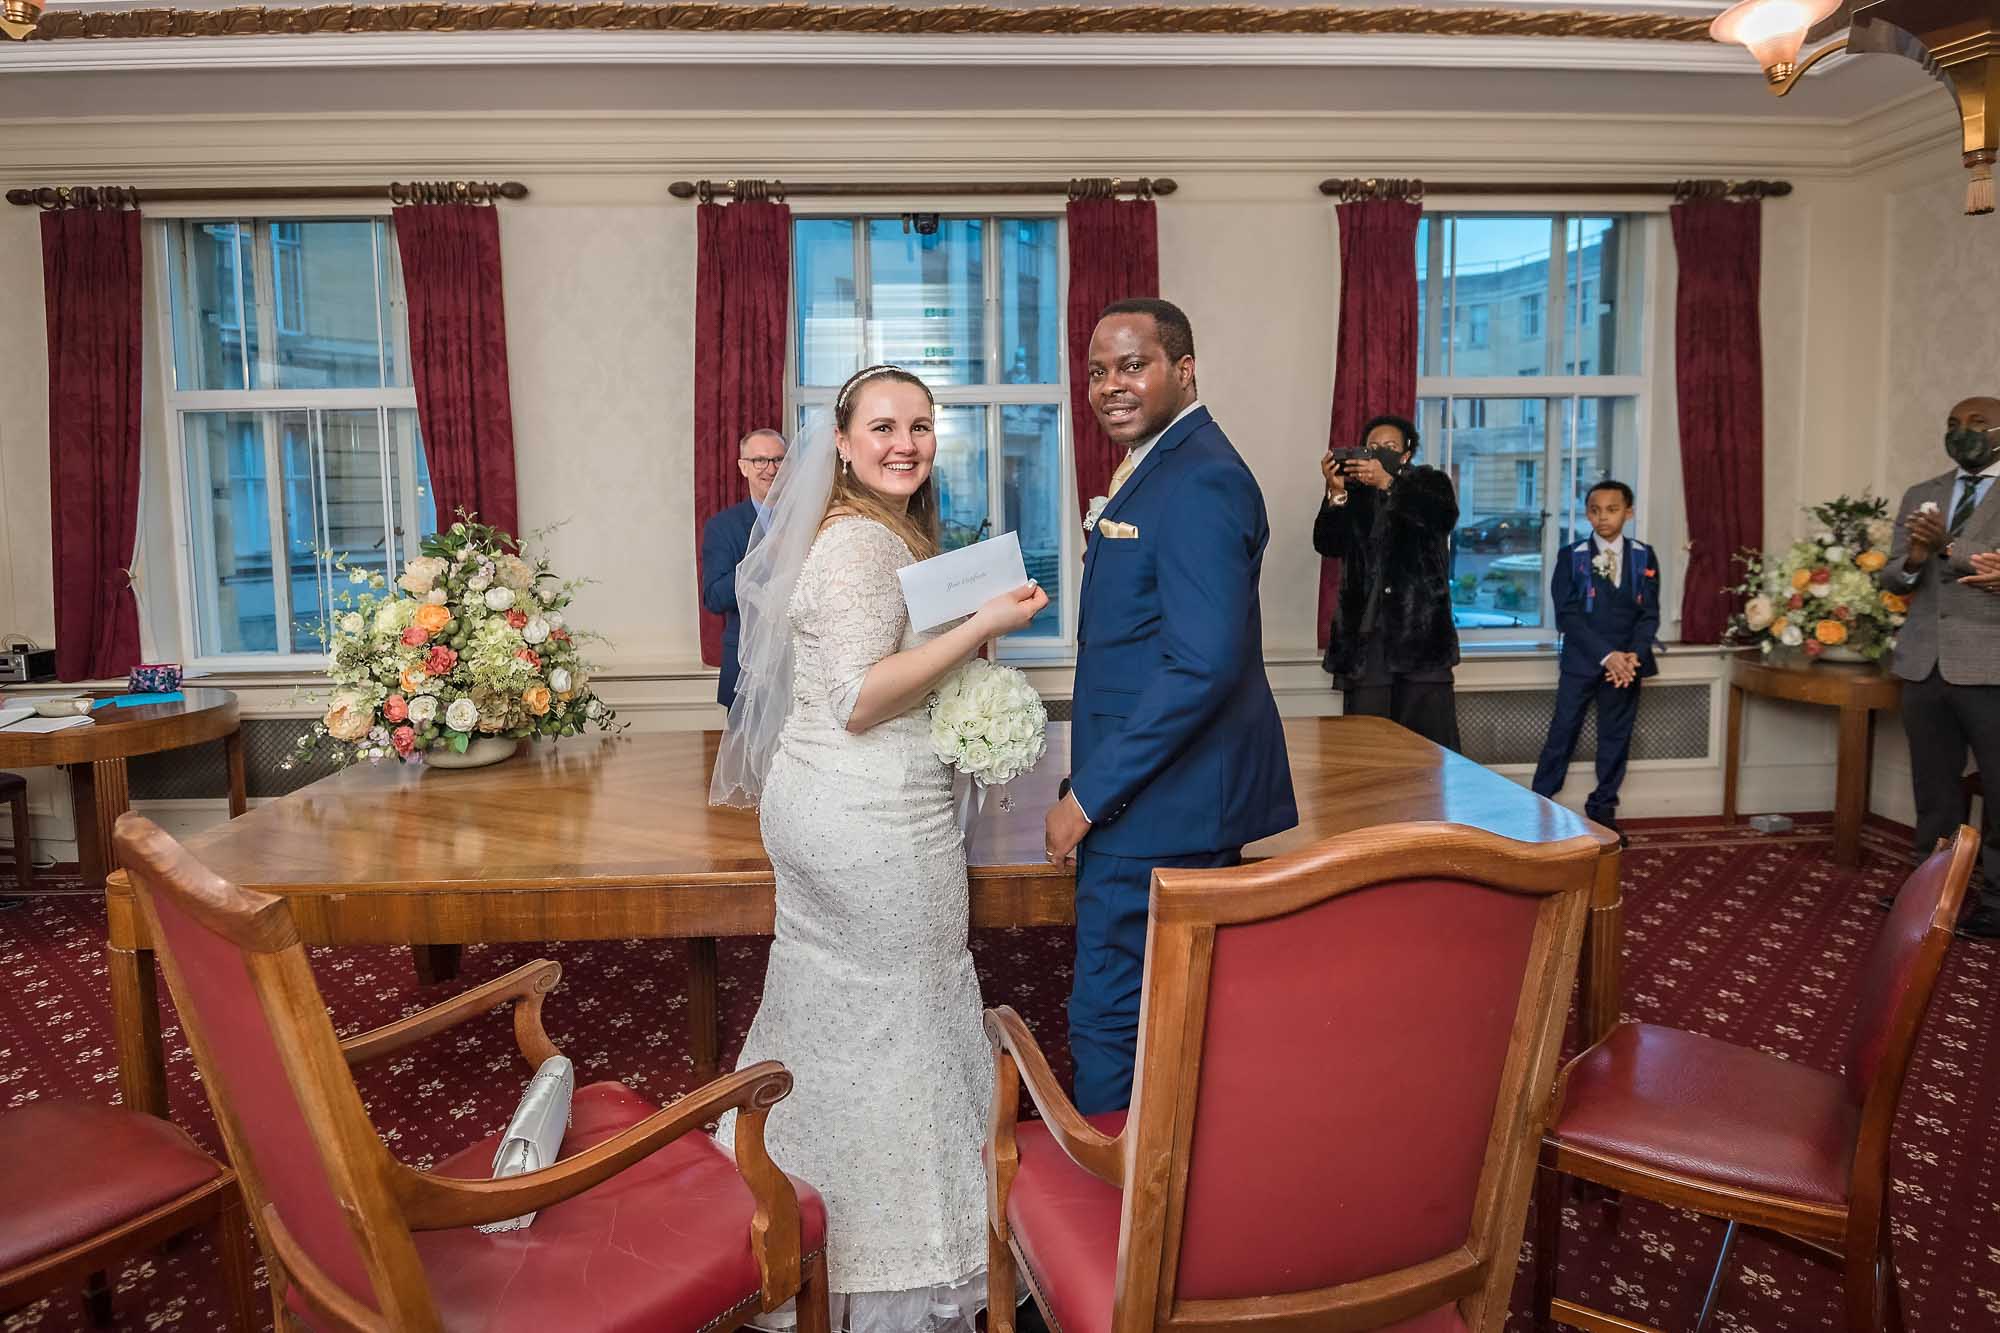 The newly-weds show off their marriage certificate at their Wandsworth Town Hall wedding